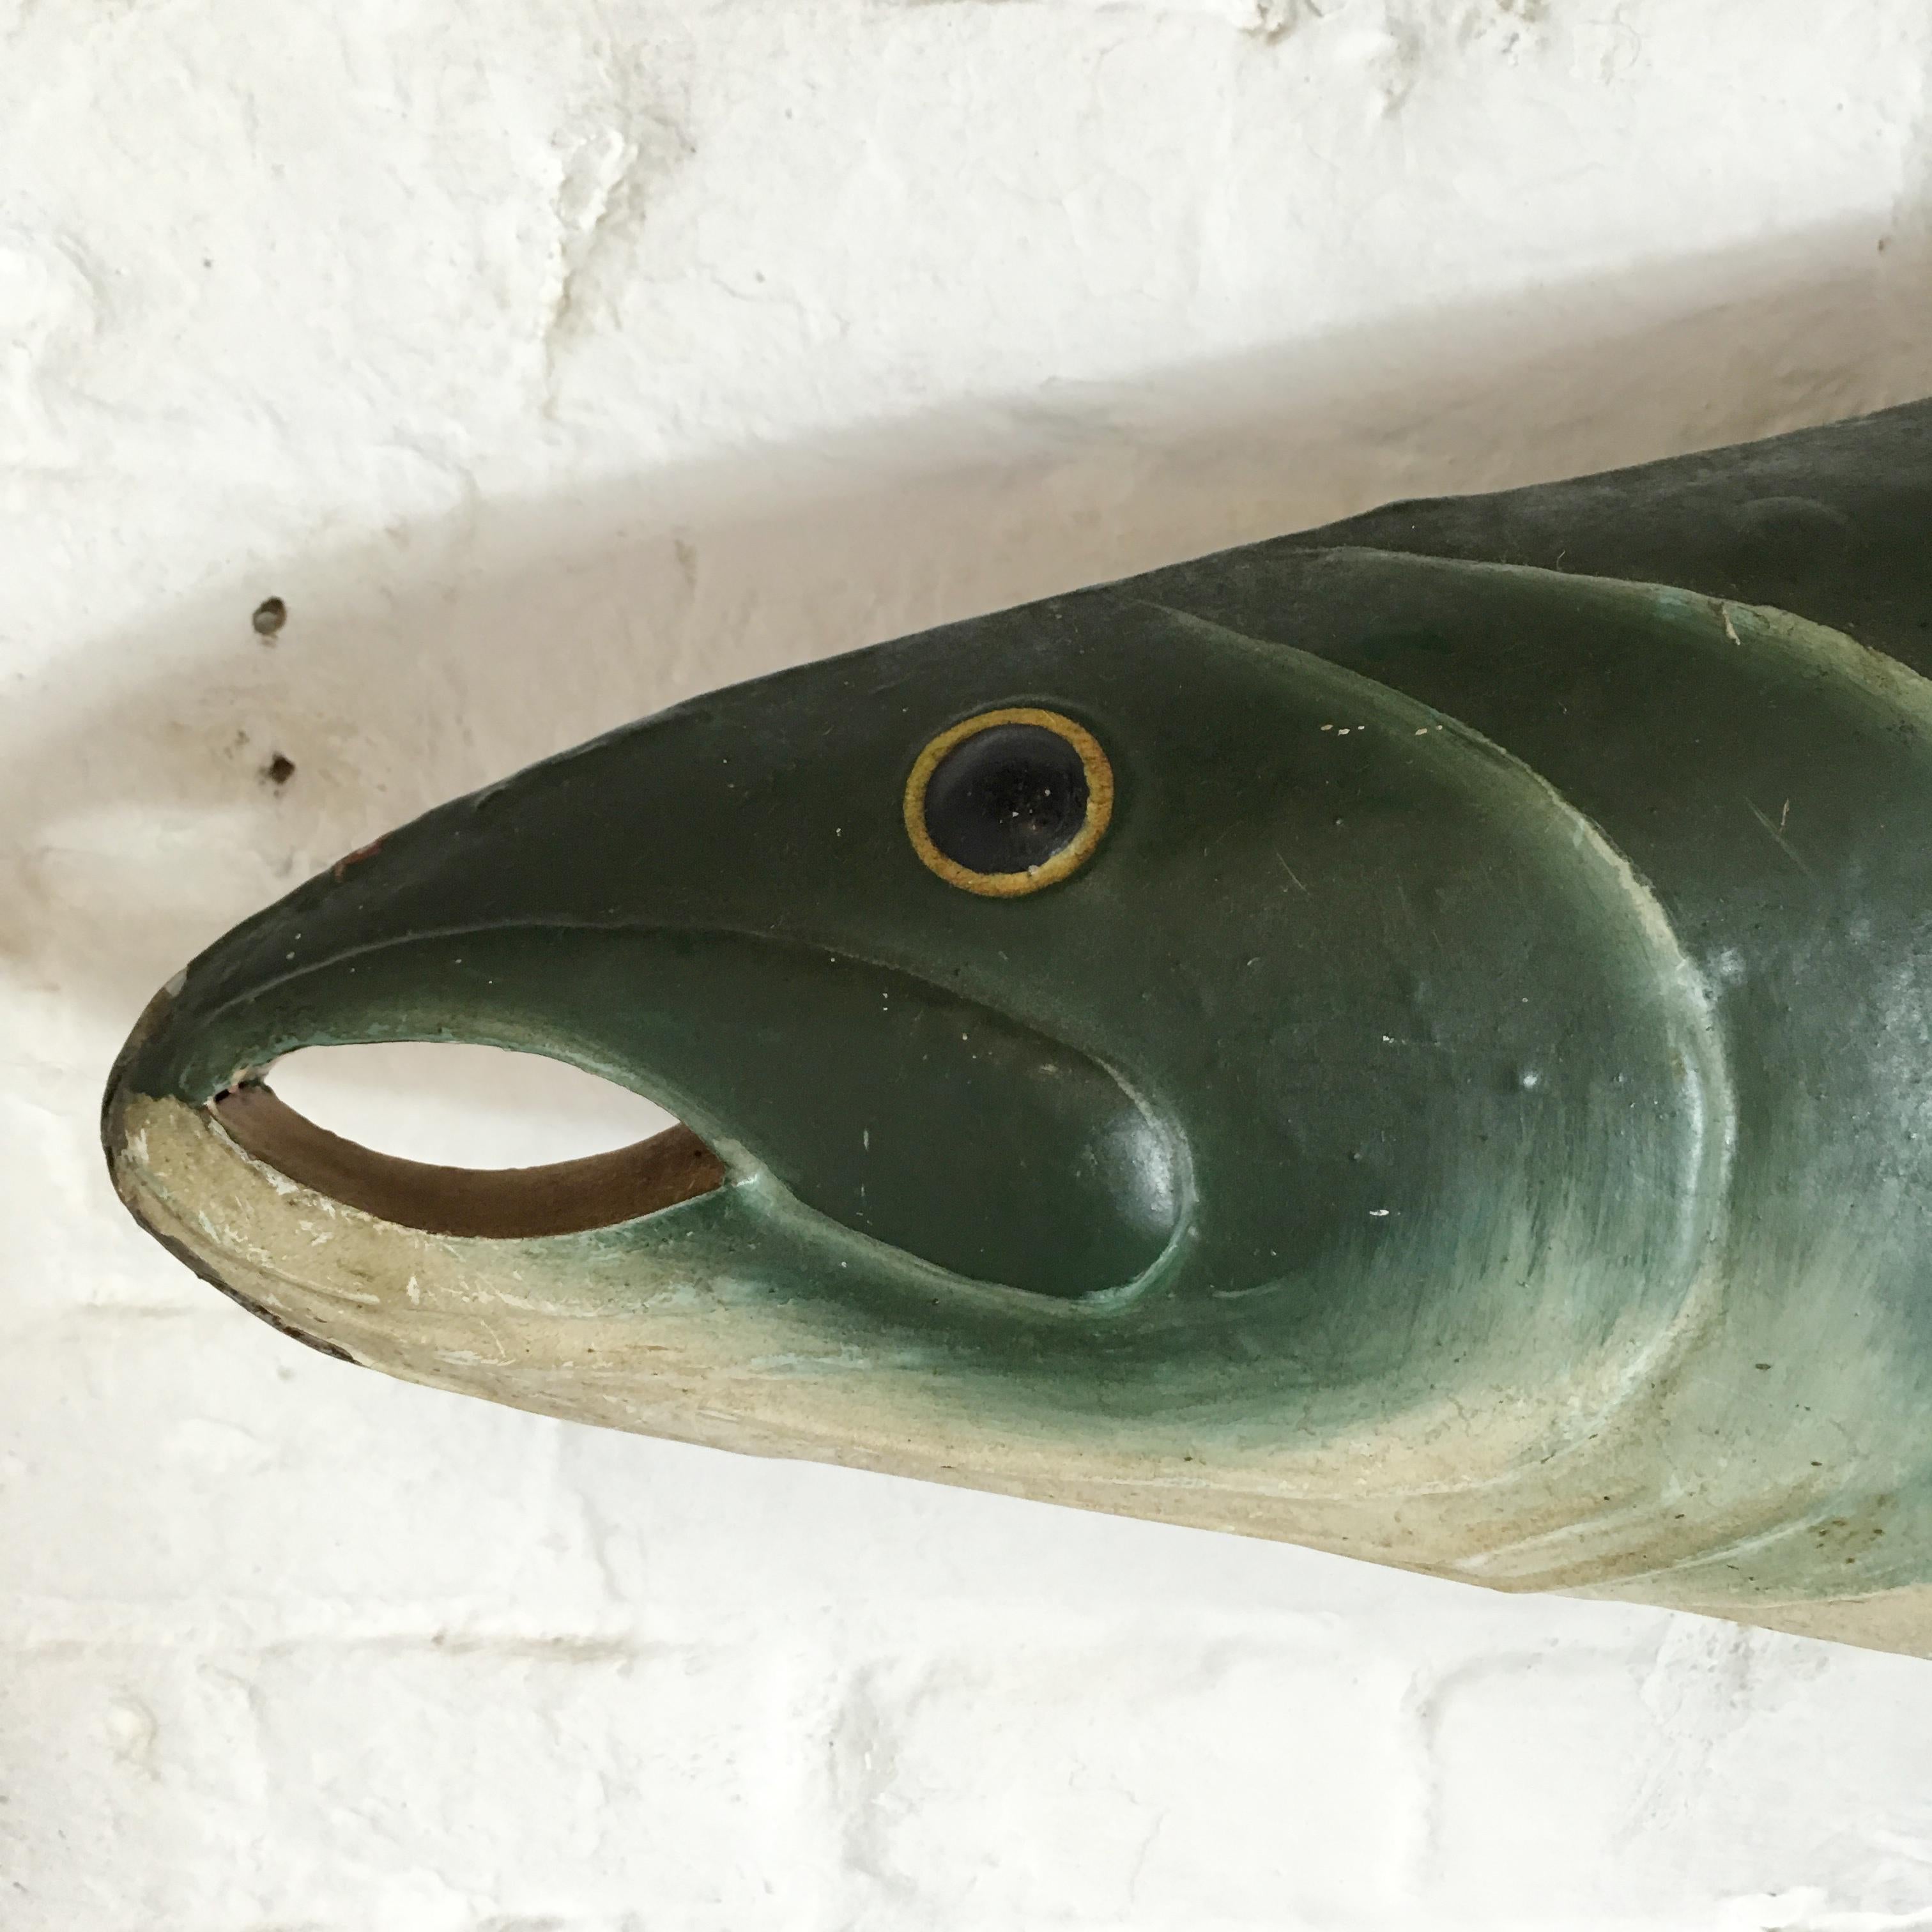 Antique trade advertising sign for a fish / fishing shop
circa 1900's
France
Double sided large metal fish, hand painted same both sides
The fish hangs on a small chain at the top
One of the fins on the fish is missing, this is shown in the